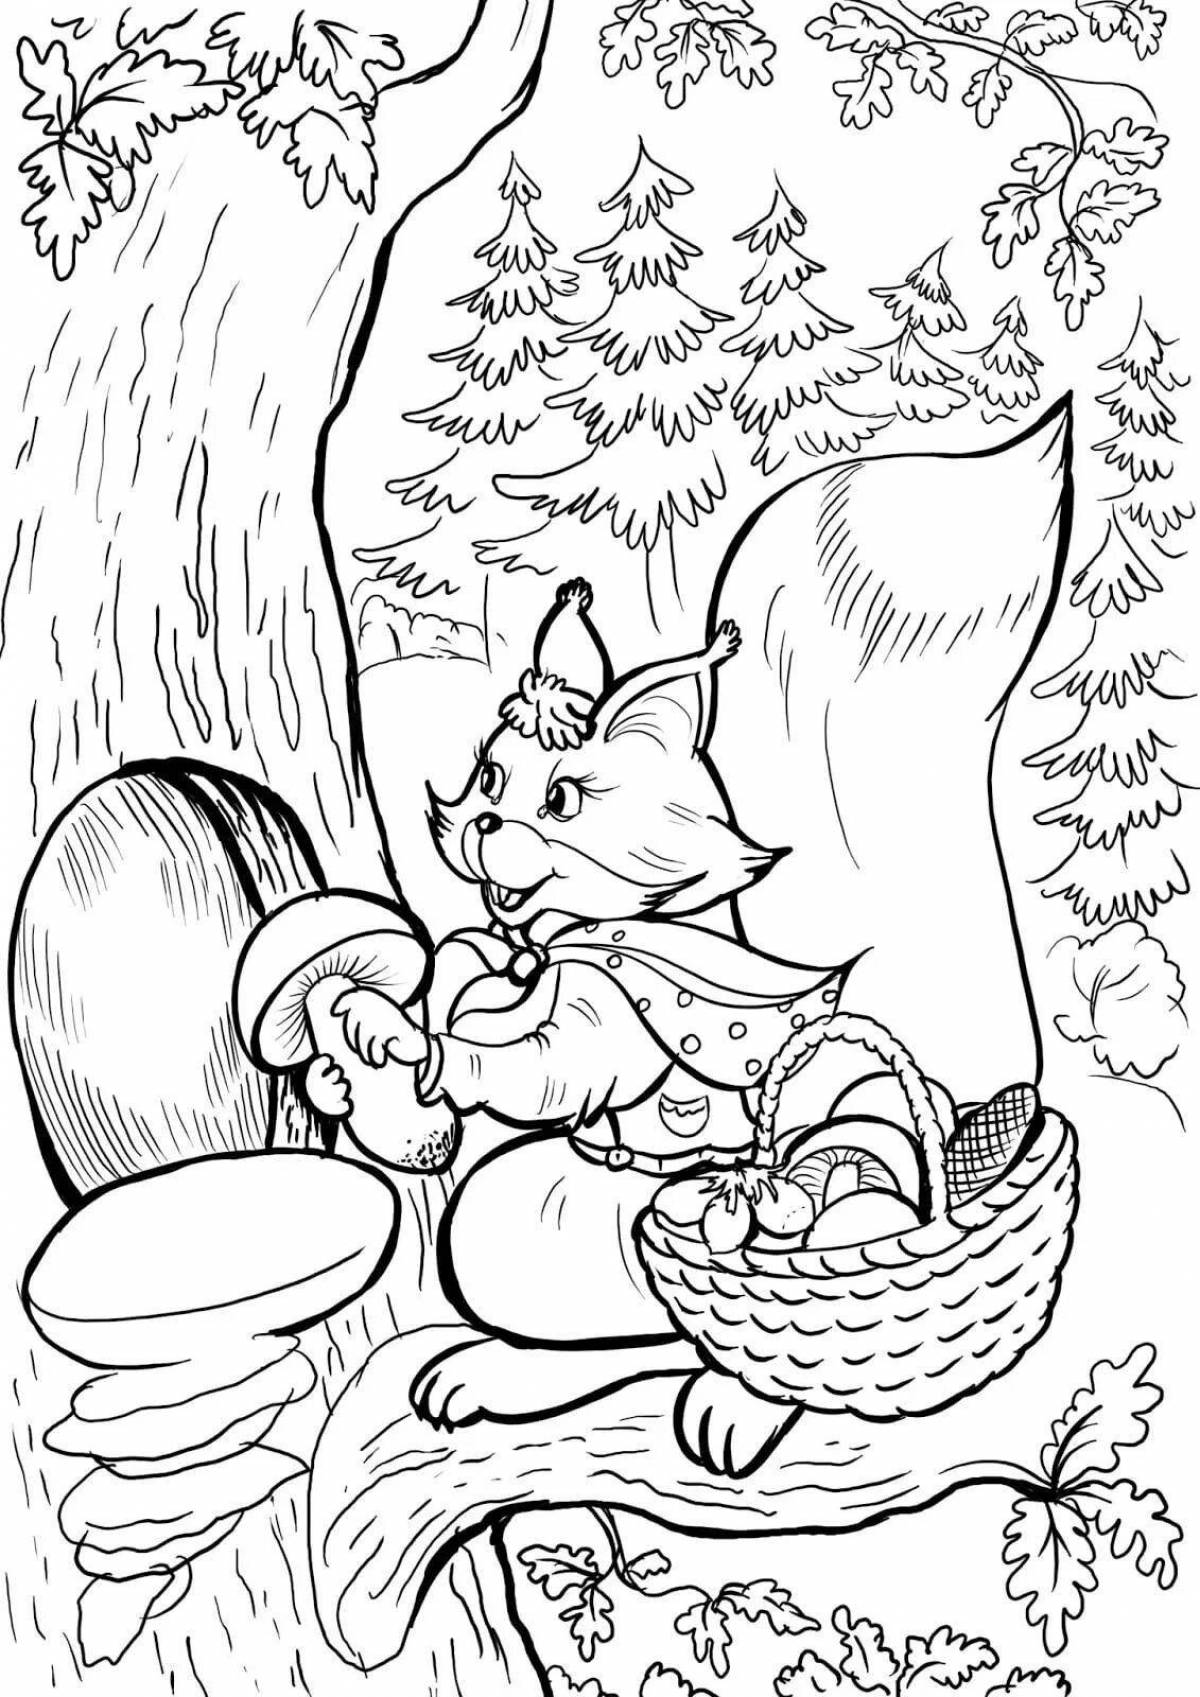 Animated winter squirrel coloring page